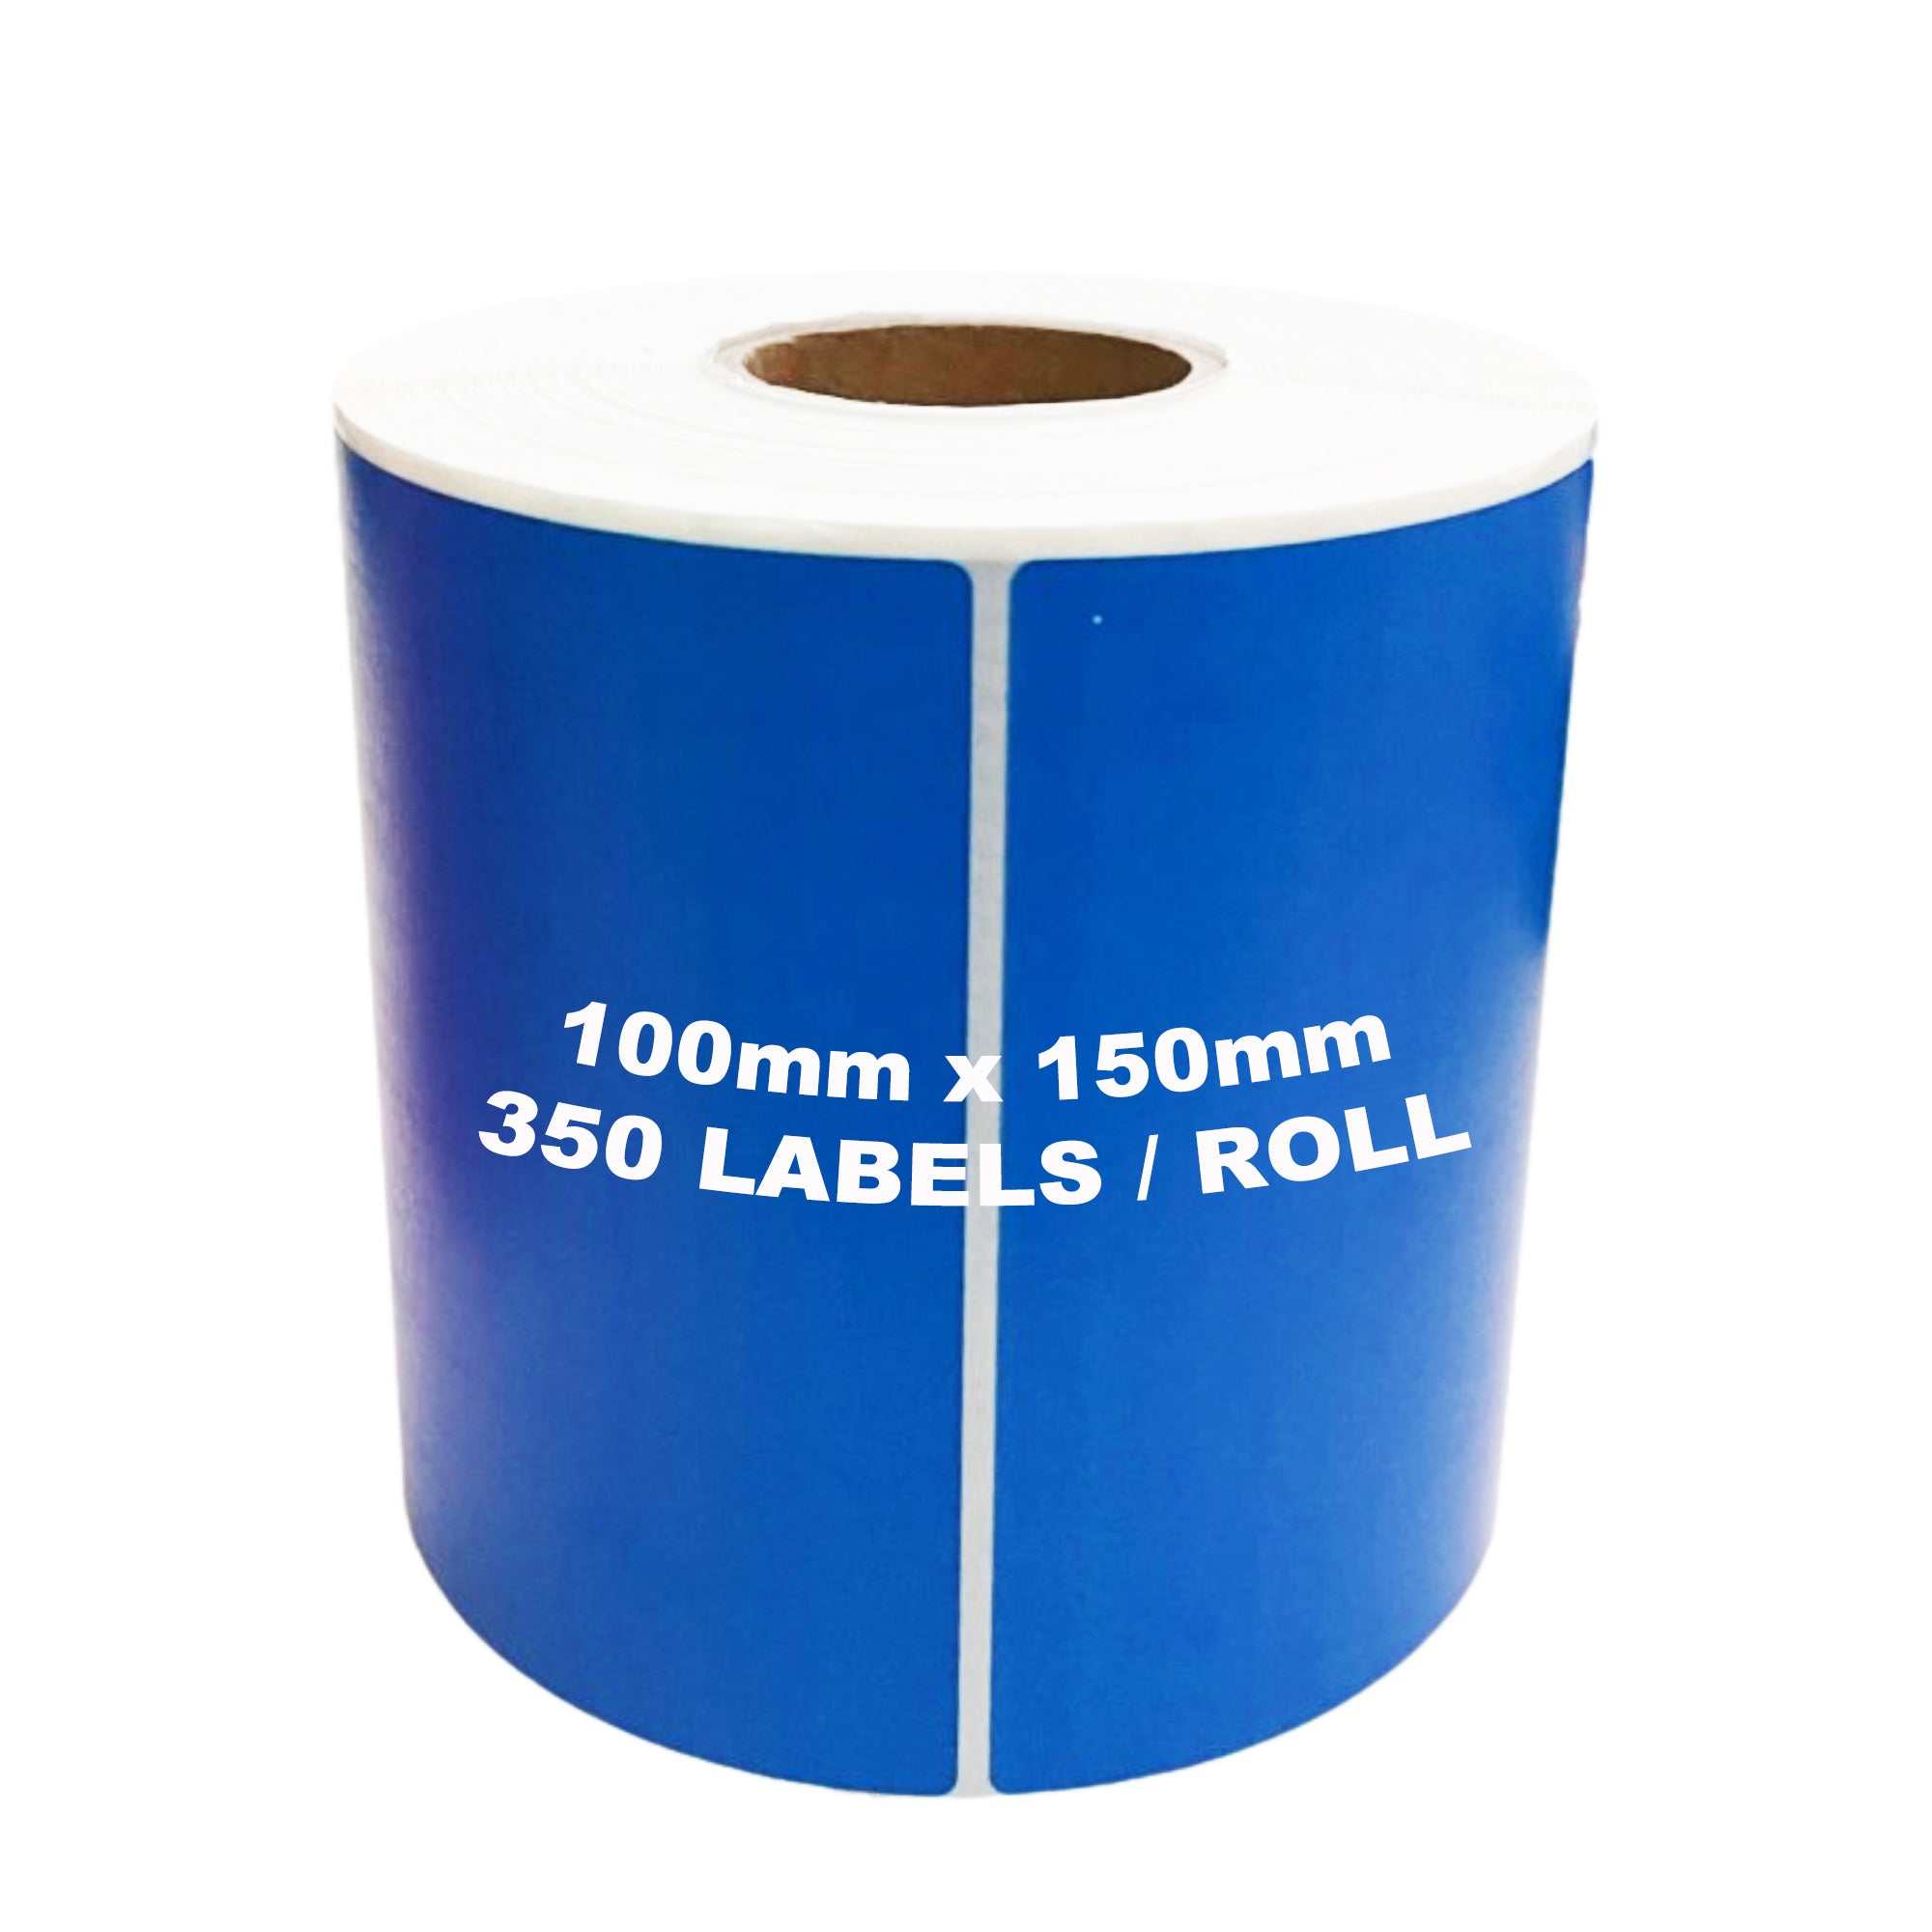 ZEBRA & ALL Direct Thermal Printer Compatible BLUE Labels 100mm x 150mm 350 Labels/Roll